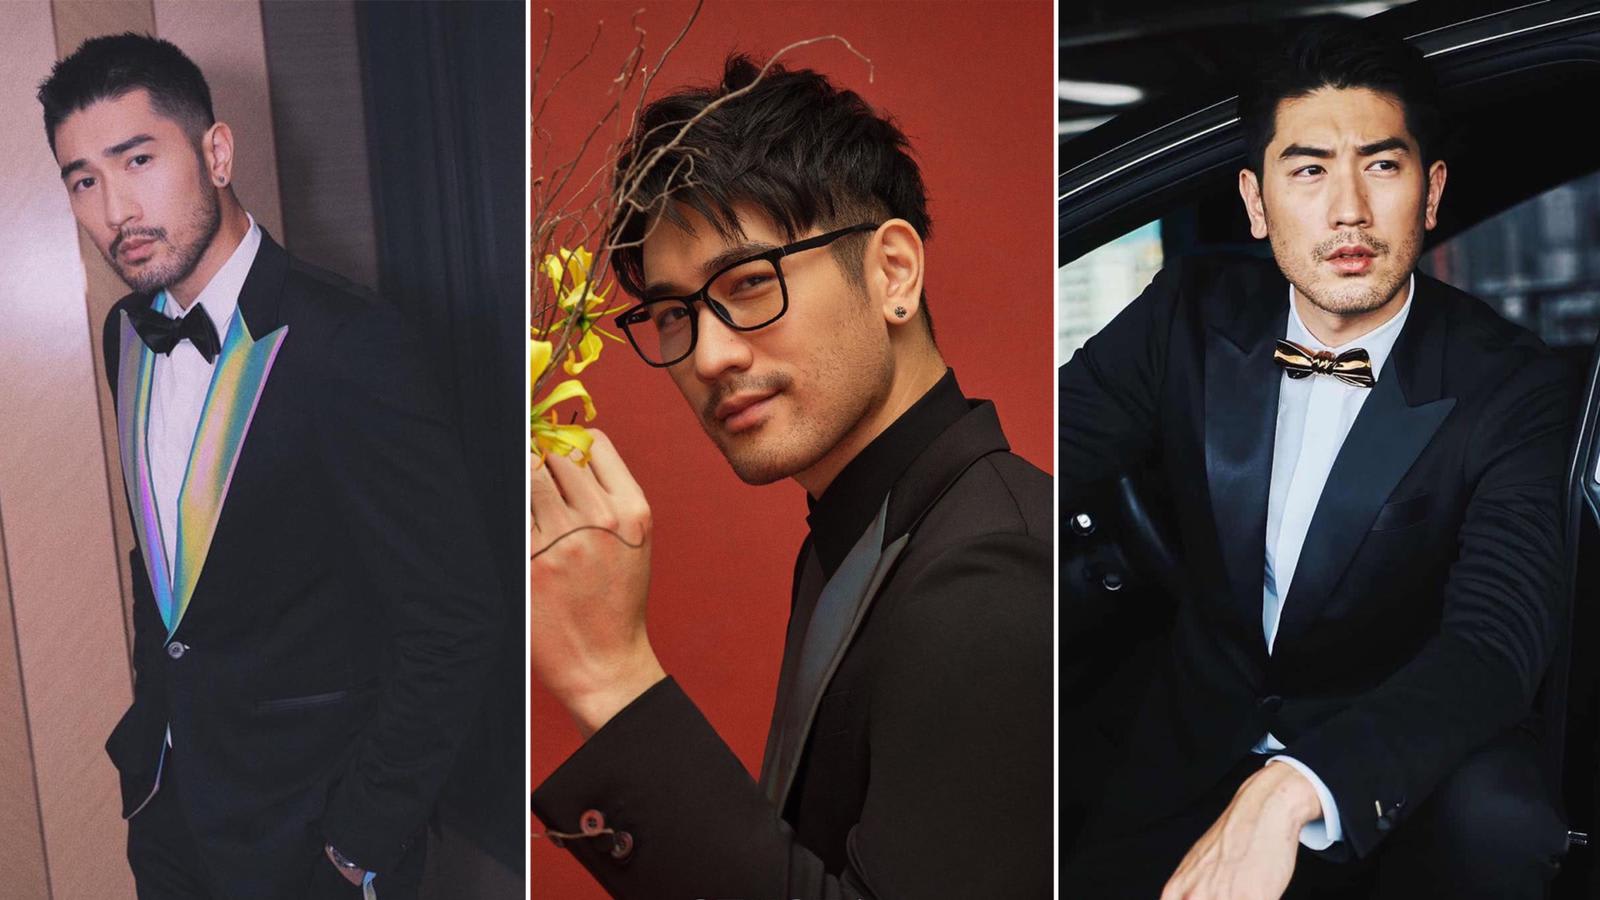 Godfrey Gao Was Going To Be A Groomsman At His Pal’s Wedding On Friday